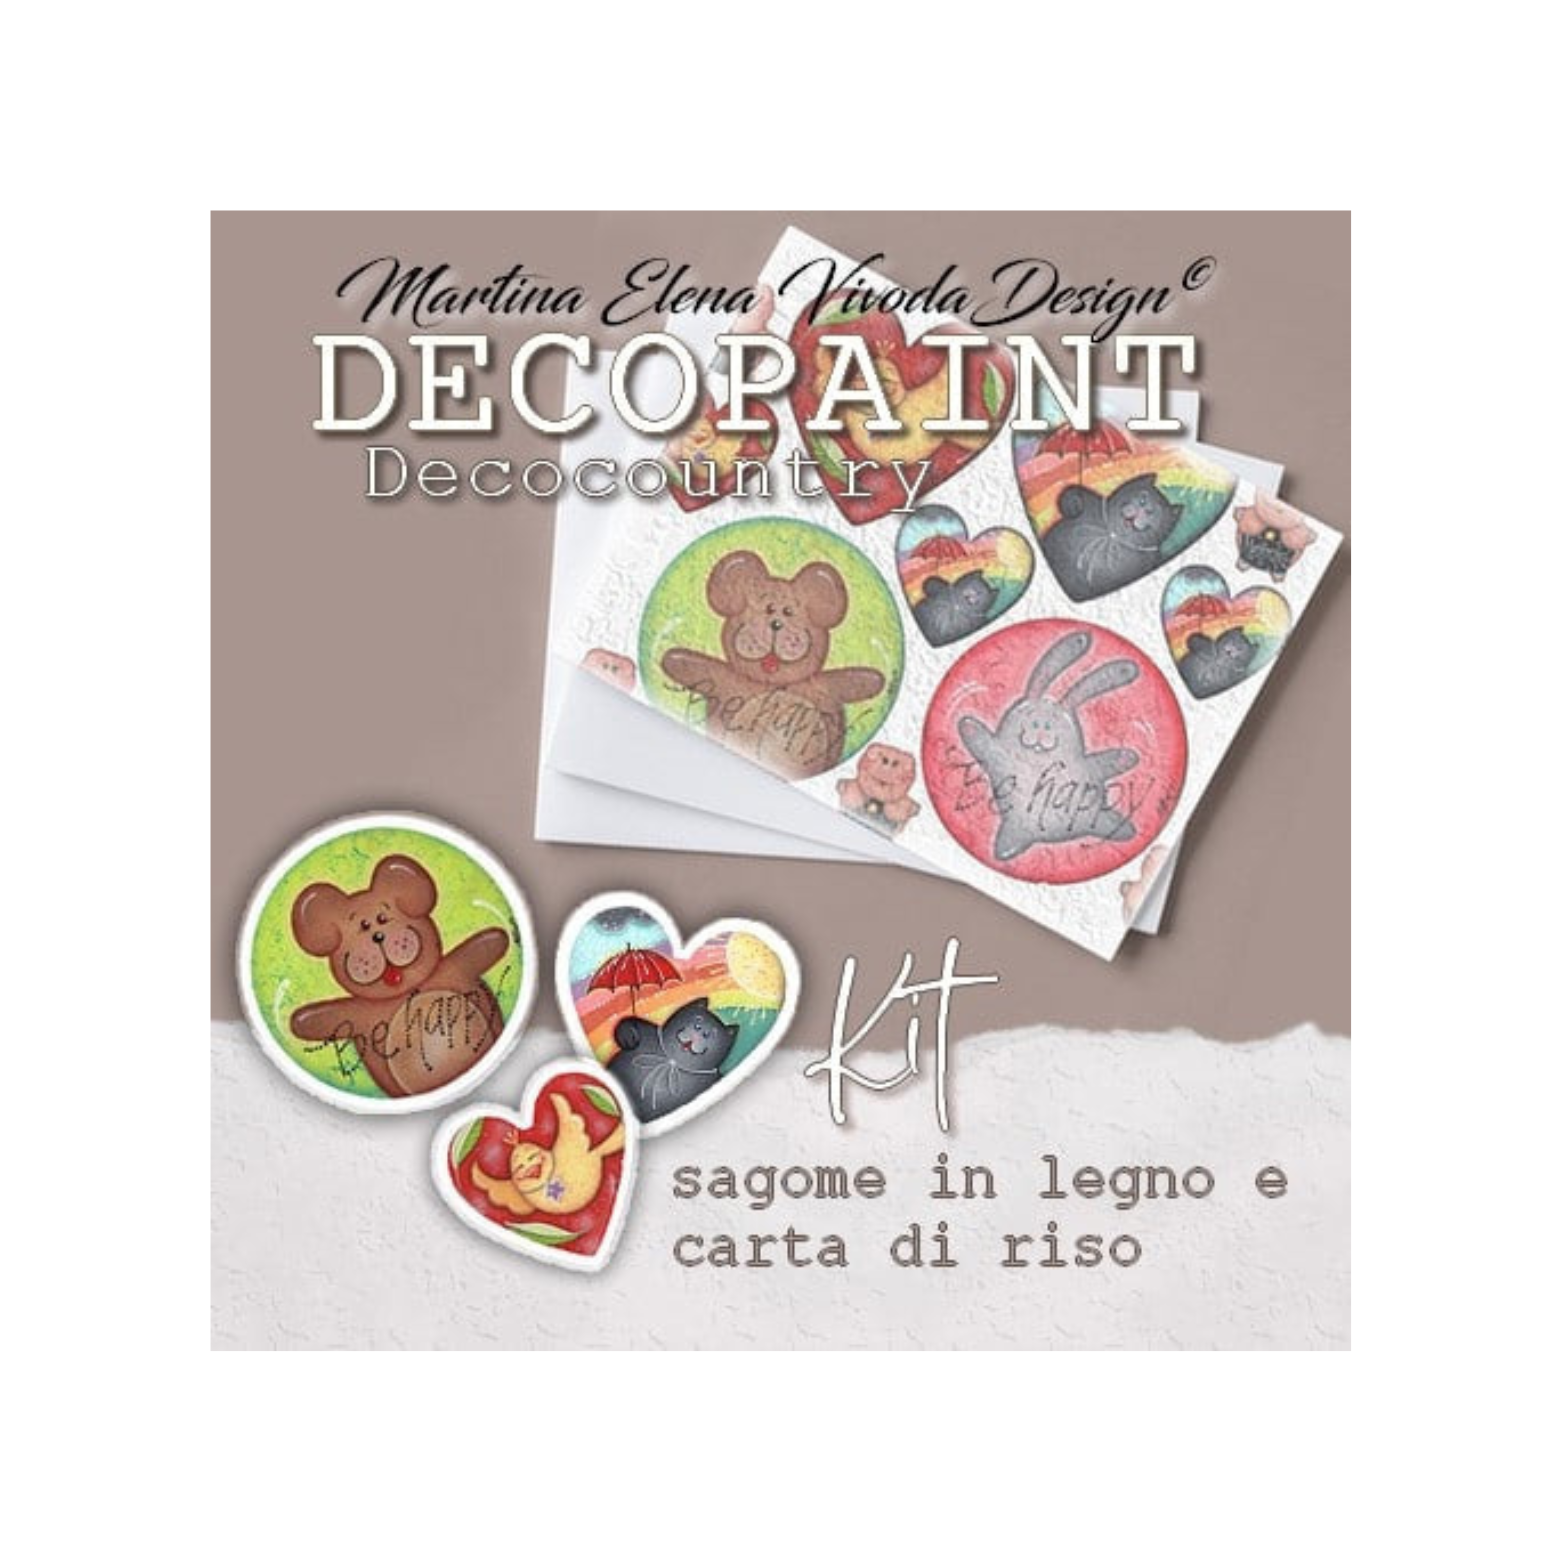 DECOPAINT DECOCOUNTRY BY MARTINA ELENA VIVODA Out of the Wood